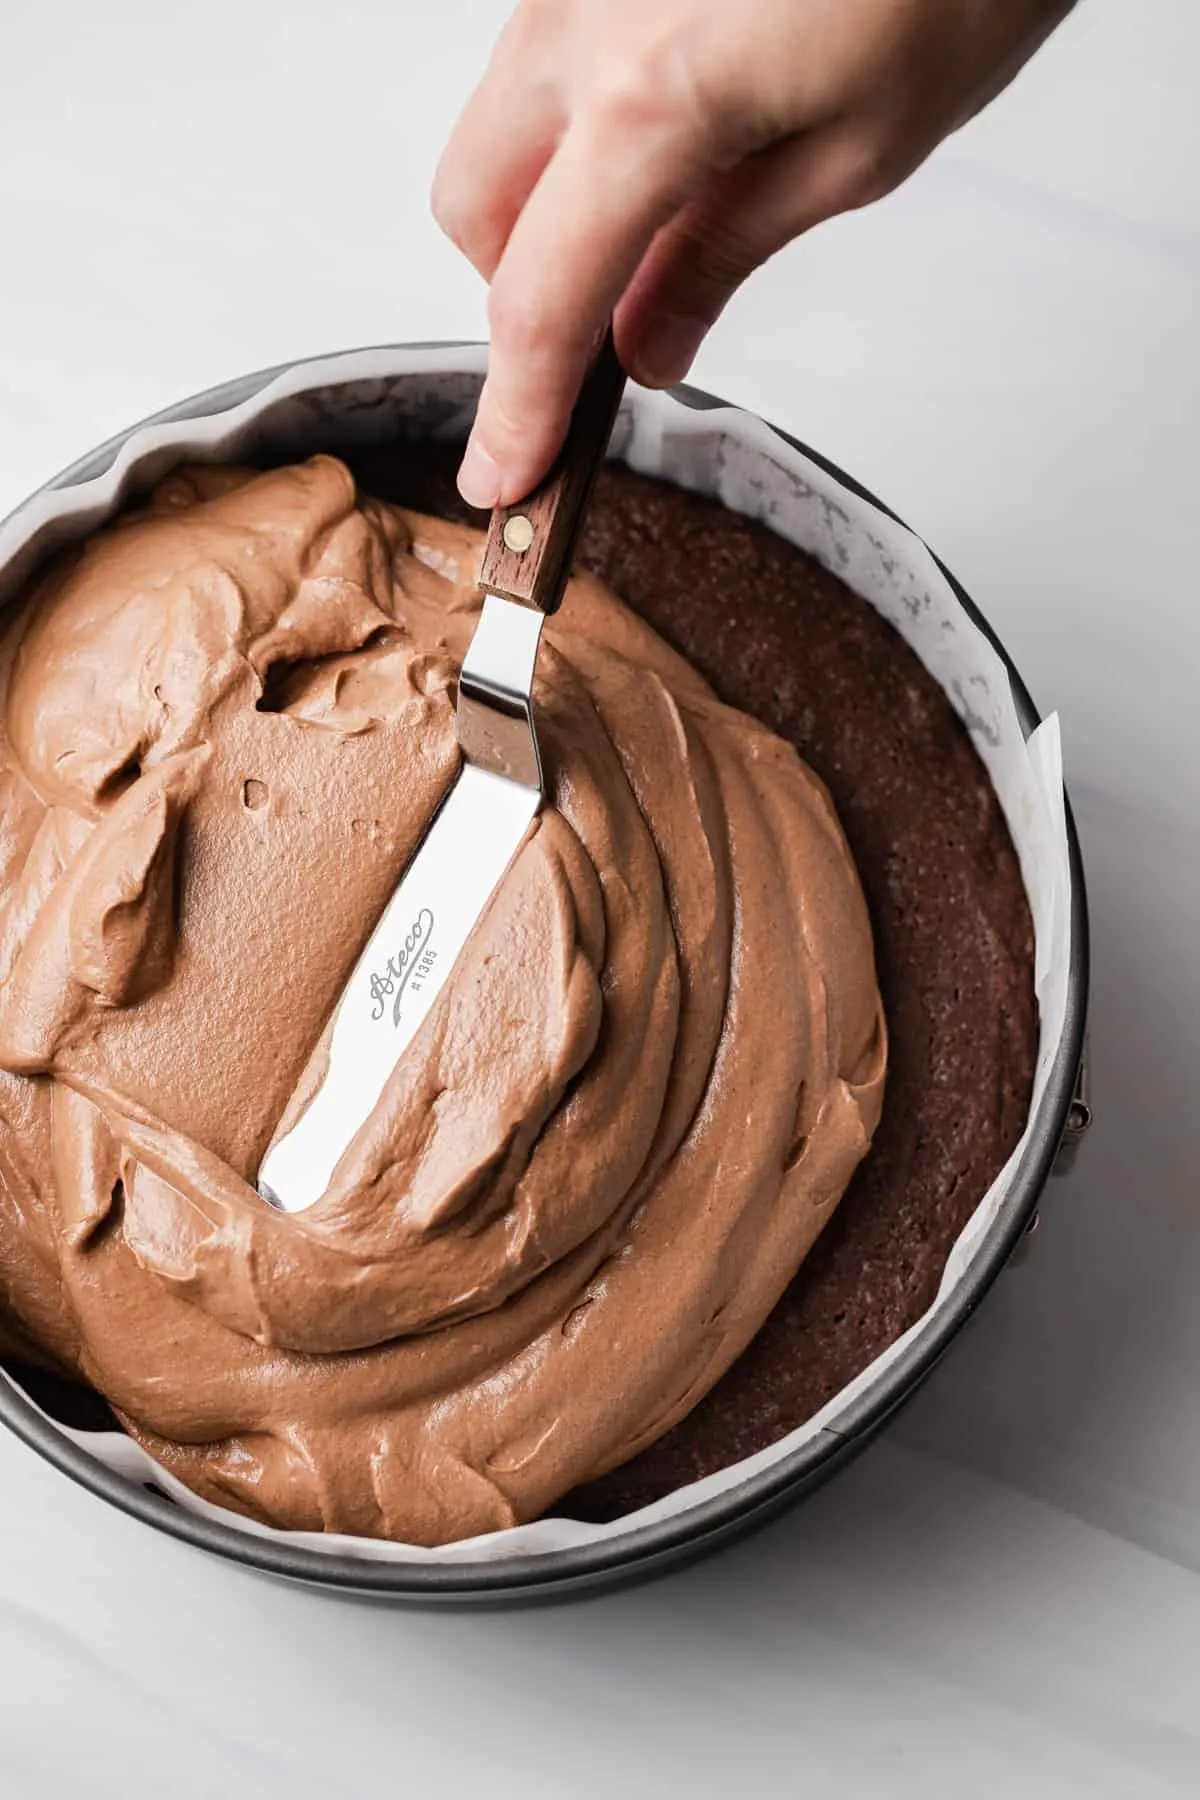 Chocolate mousse spread over brownie in round cake pan.